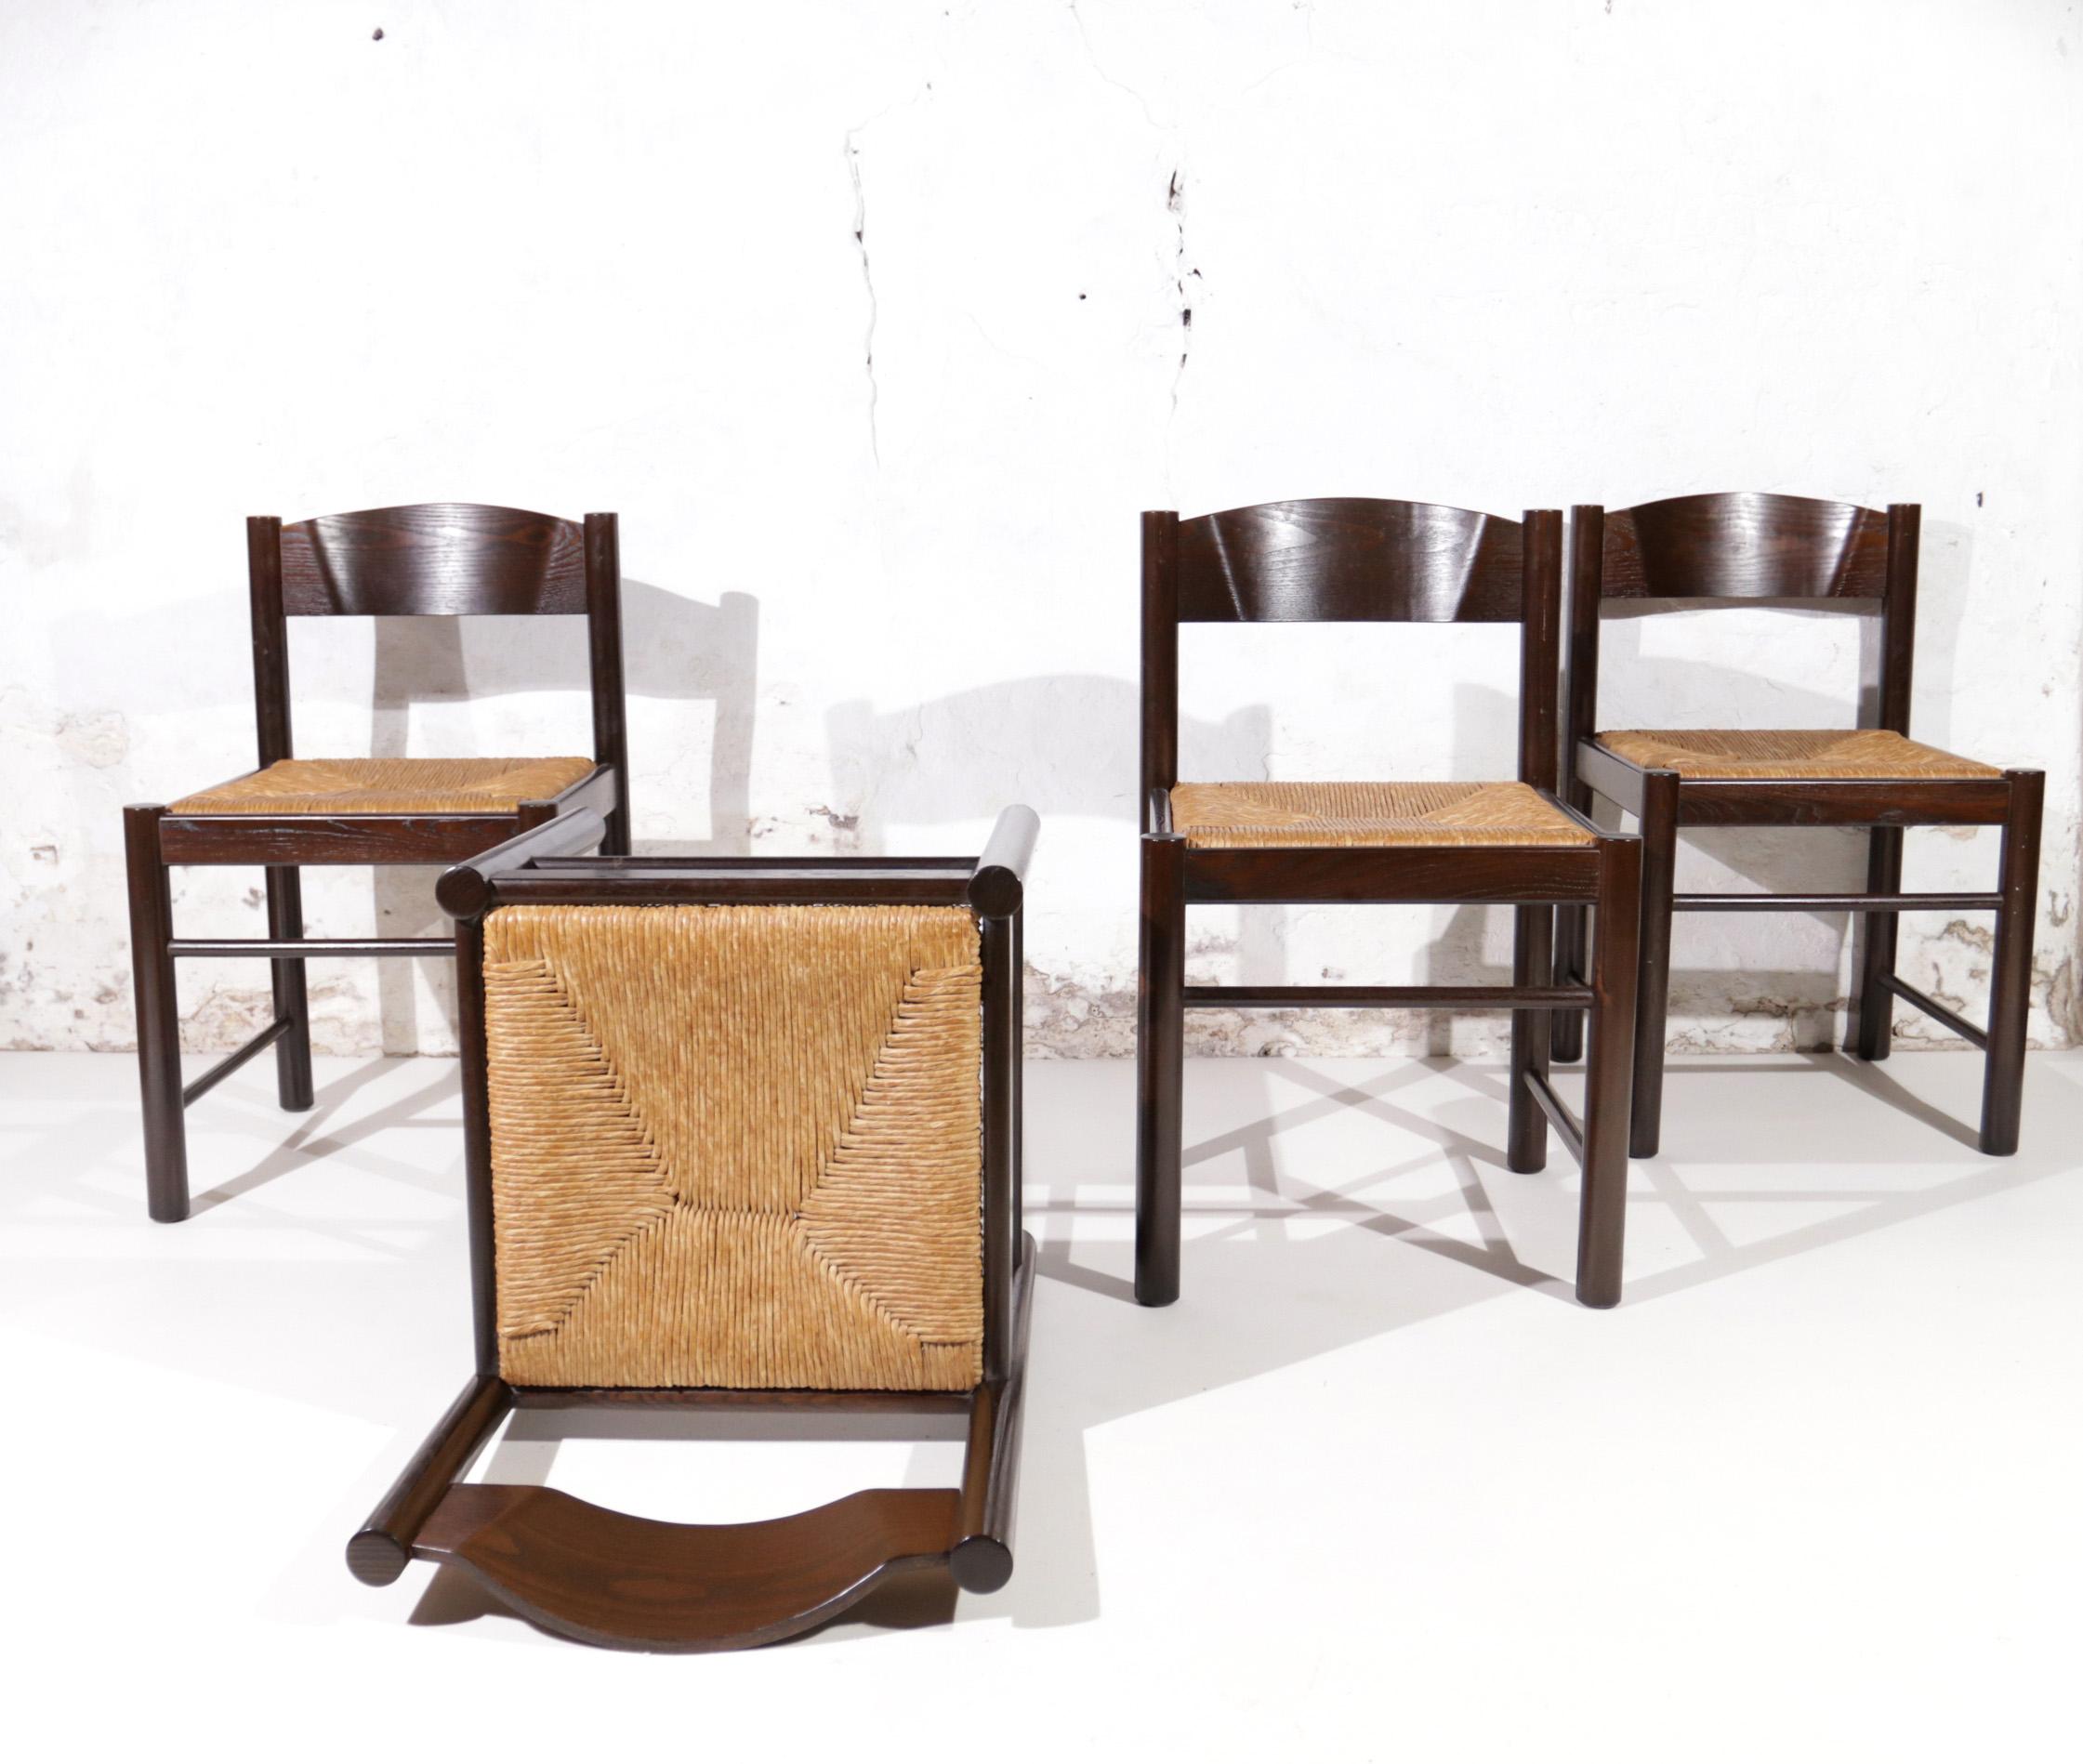 Beautiful set of 4 dining chairs in the manner of Charlotte Perriand.
Solid, dark brown coated, wooden chairs with cane / rush seats.
